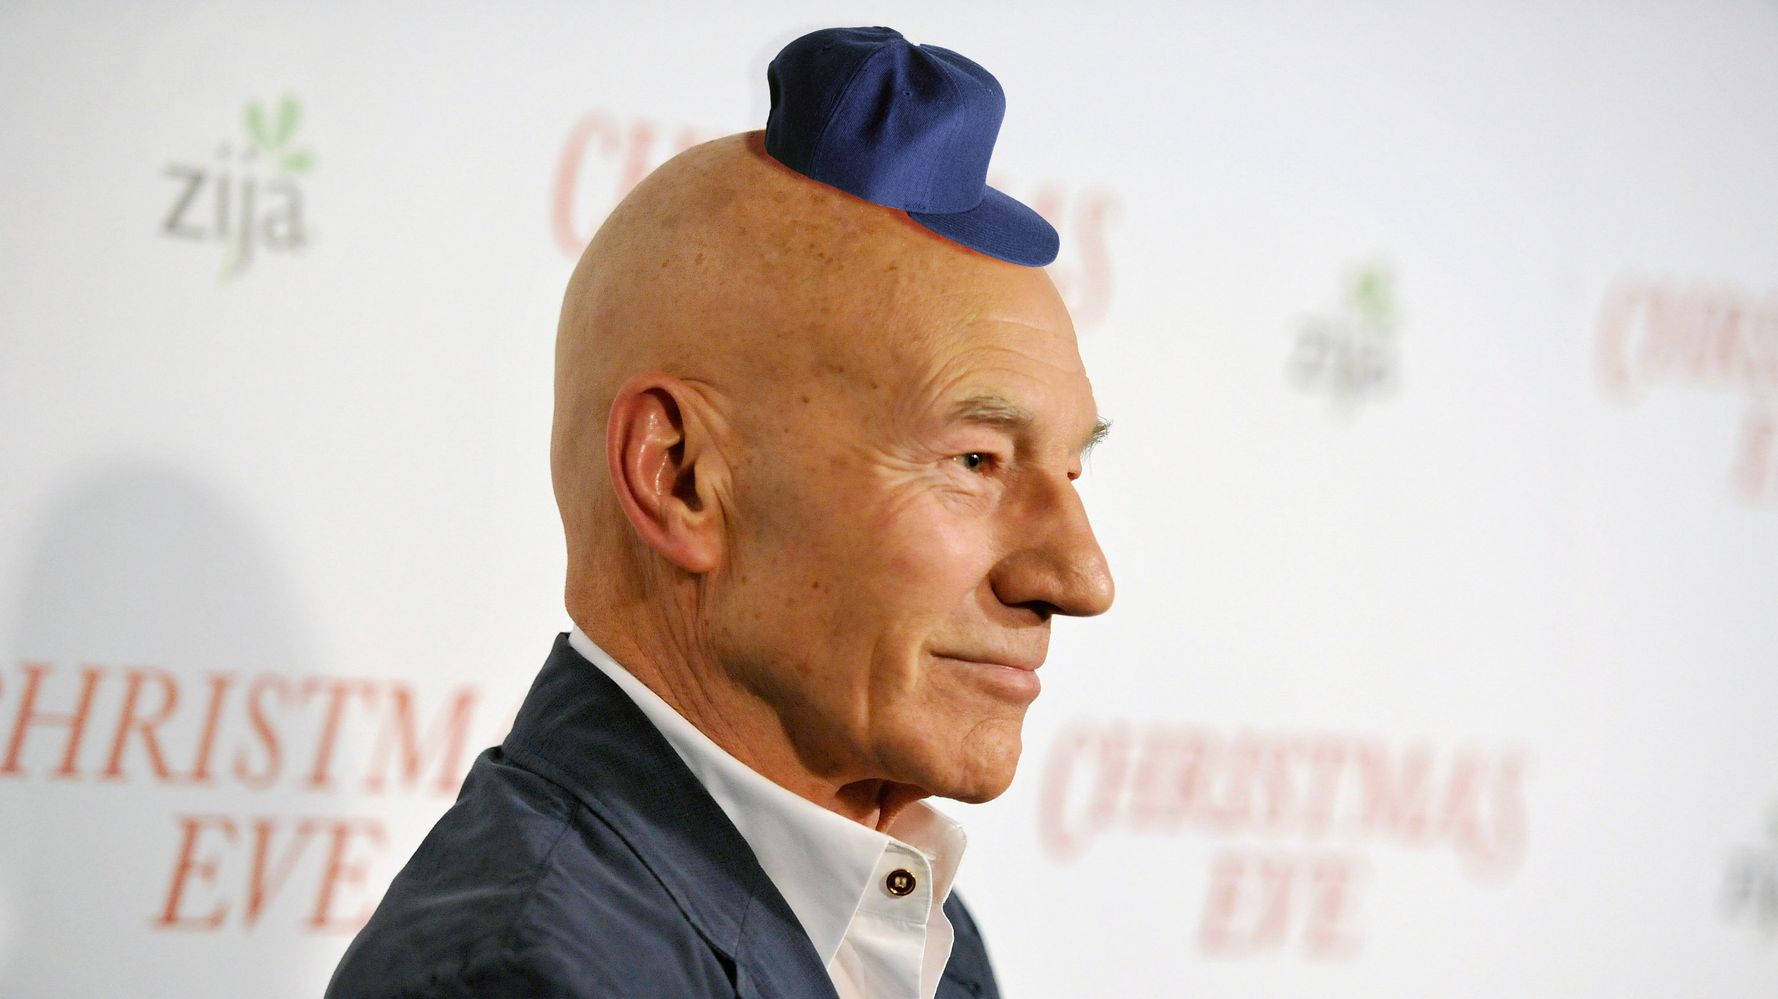 Does Wearing A Hat Make You Go Bald? | HuffPost Life